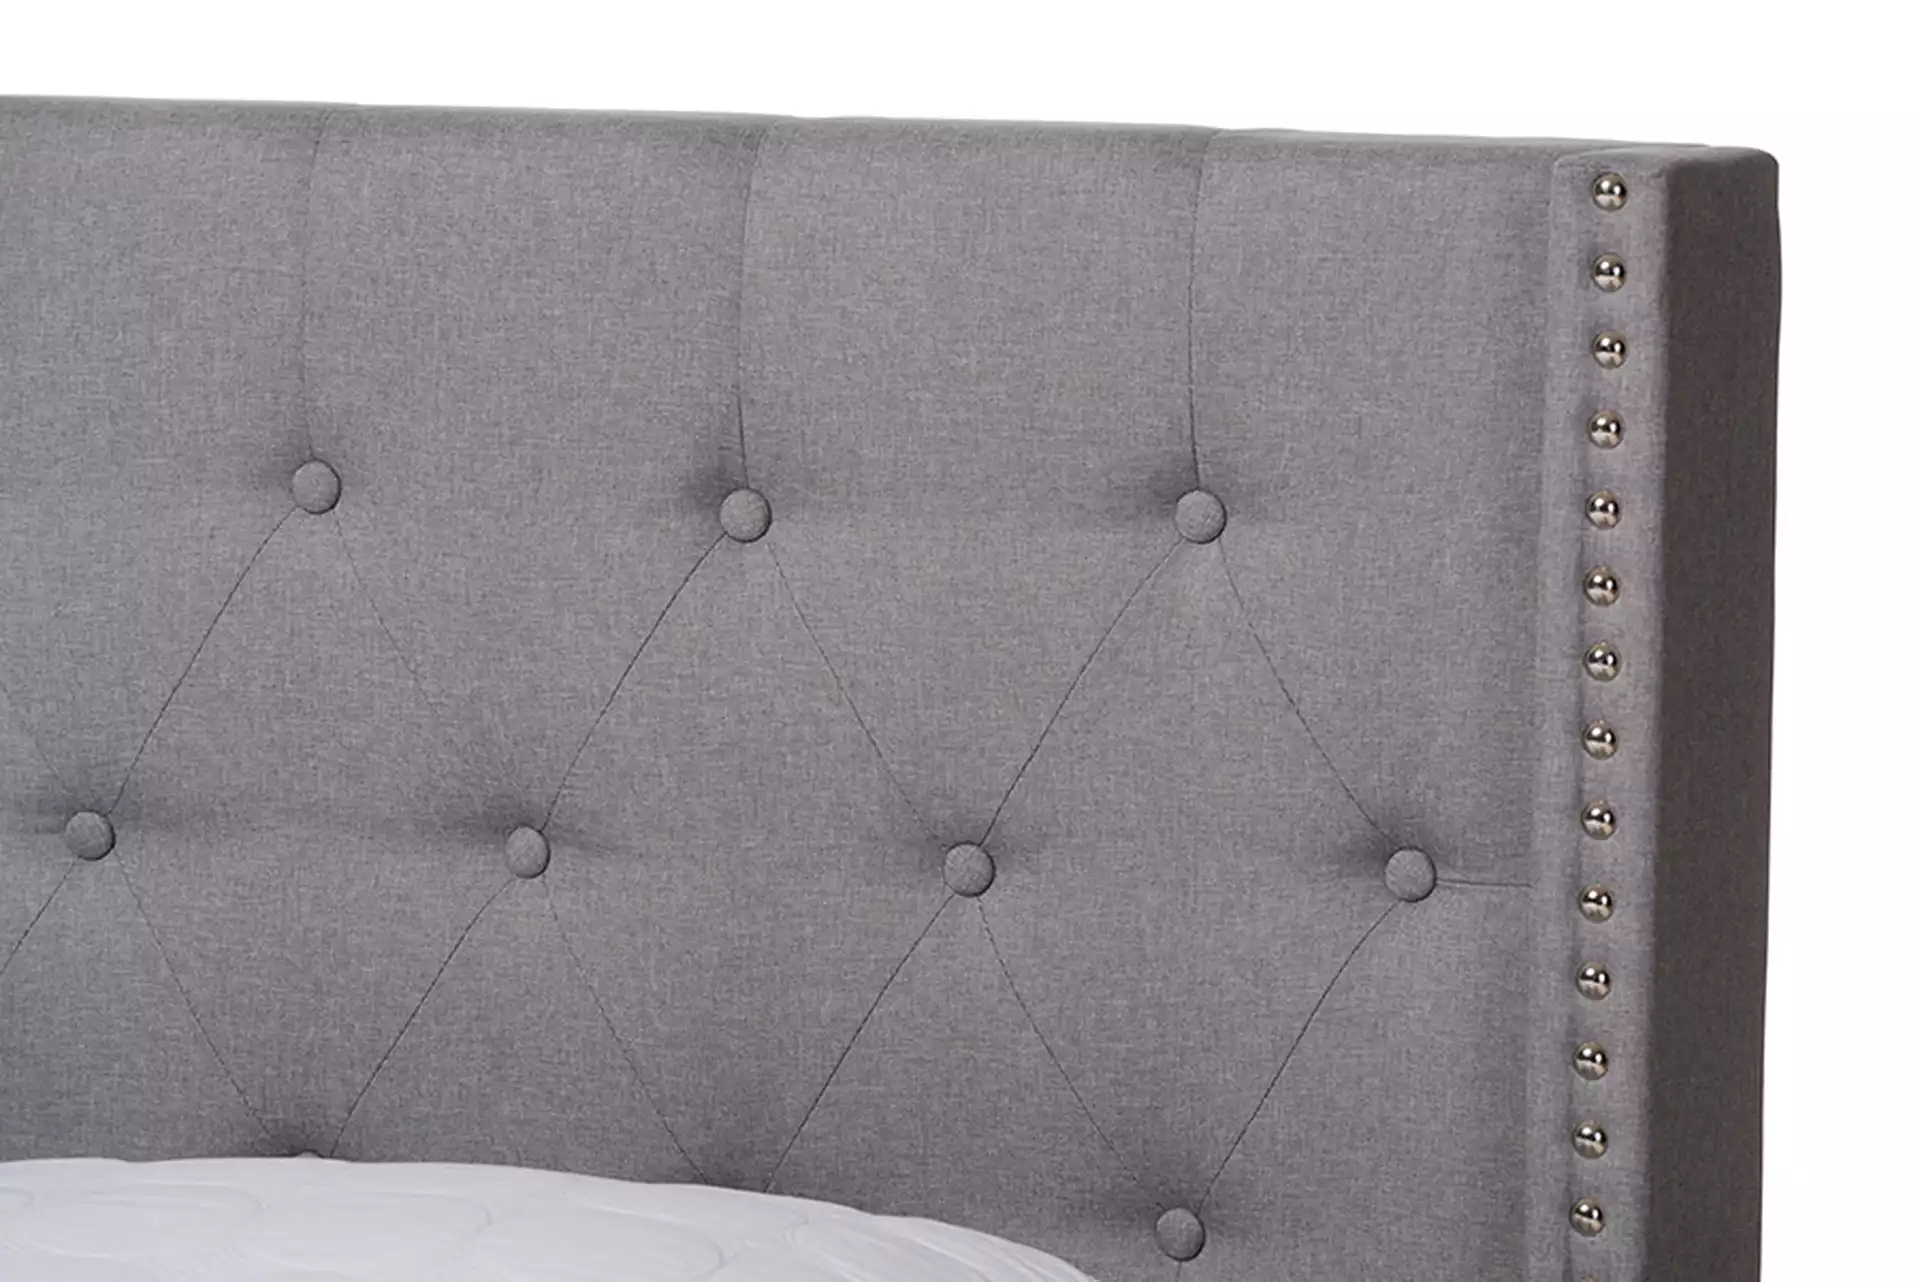 Brady Modern and Contemporary Light Grey Fabric Upholstered Full Size Bed